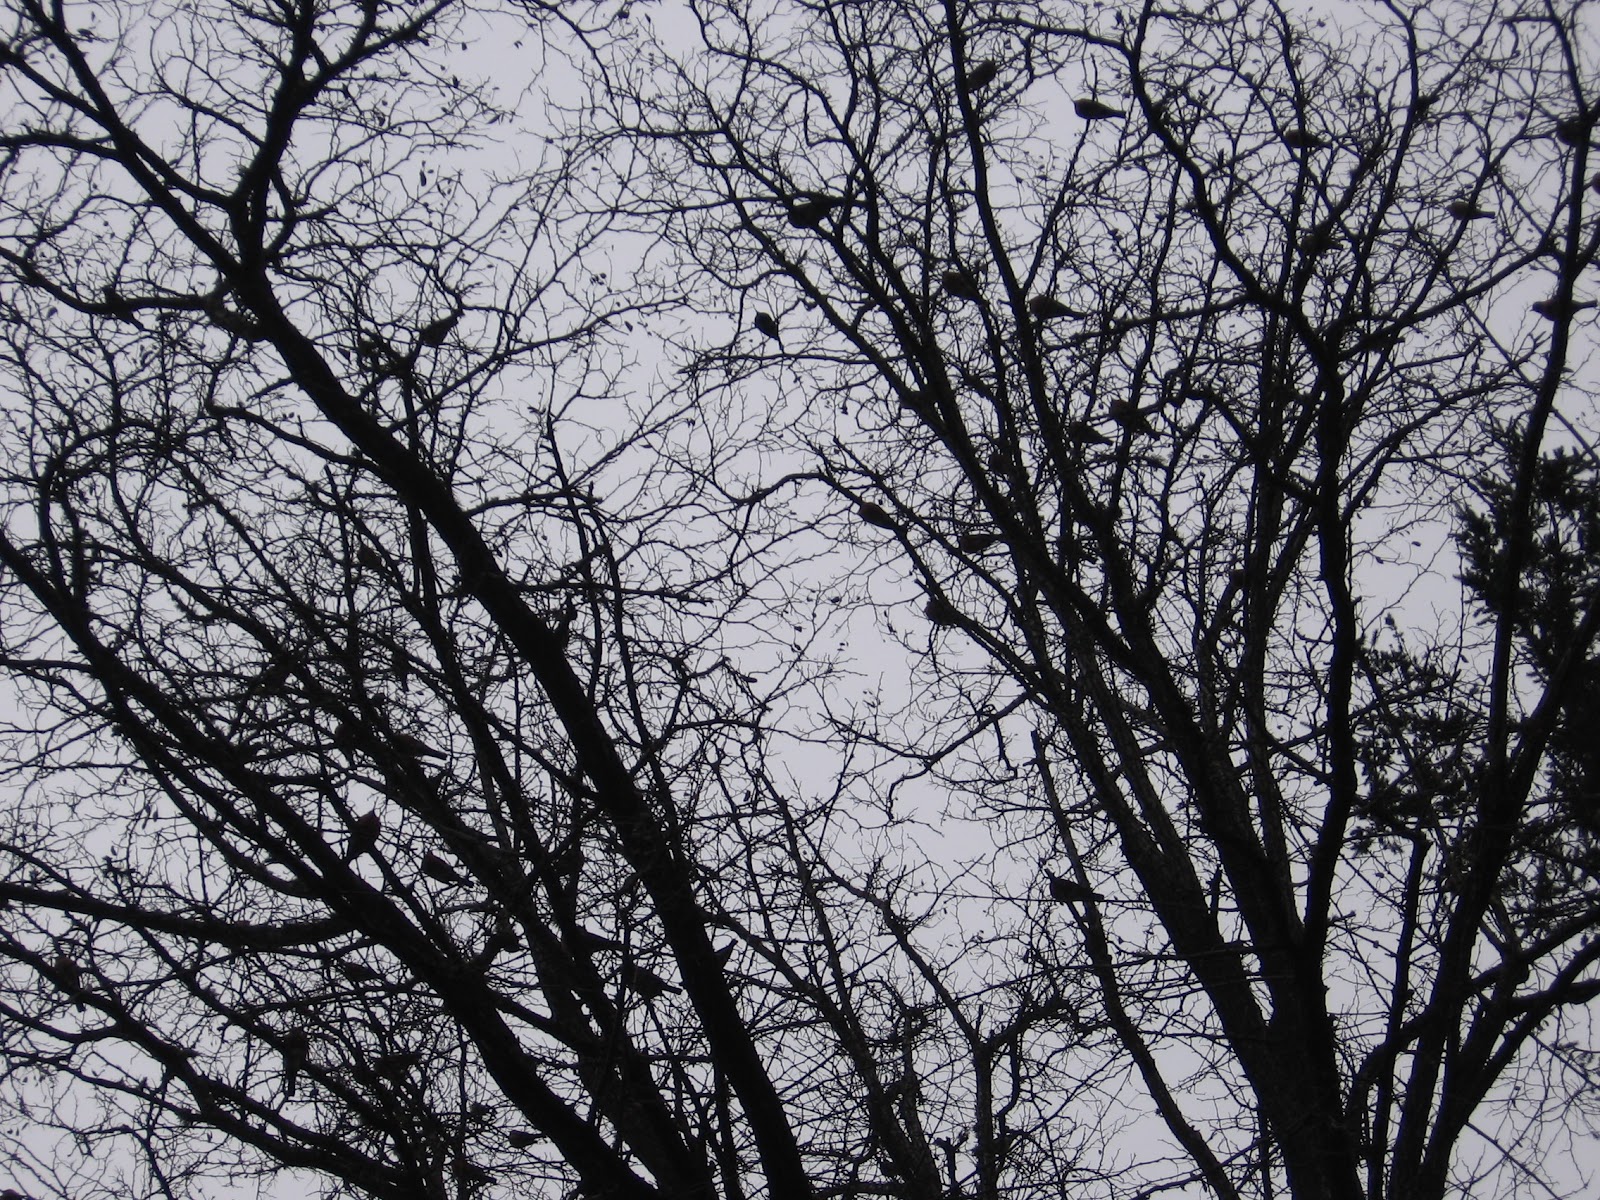 Tree Branches Silhouette Wallpaper In the bare branches of